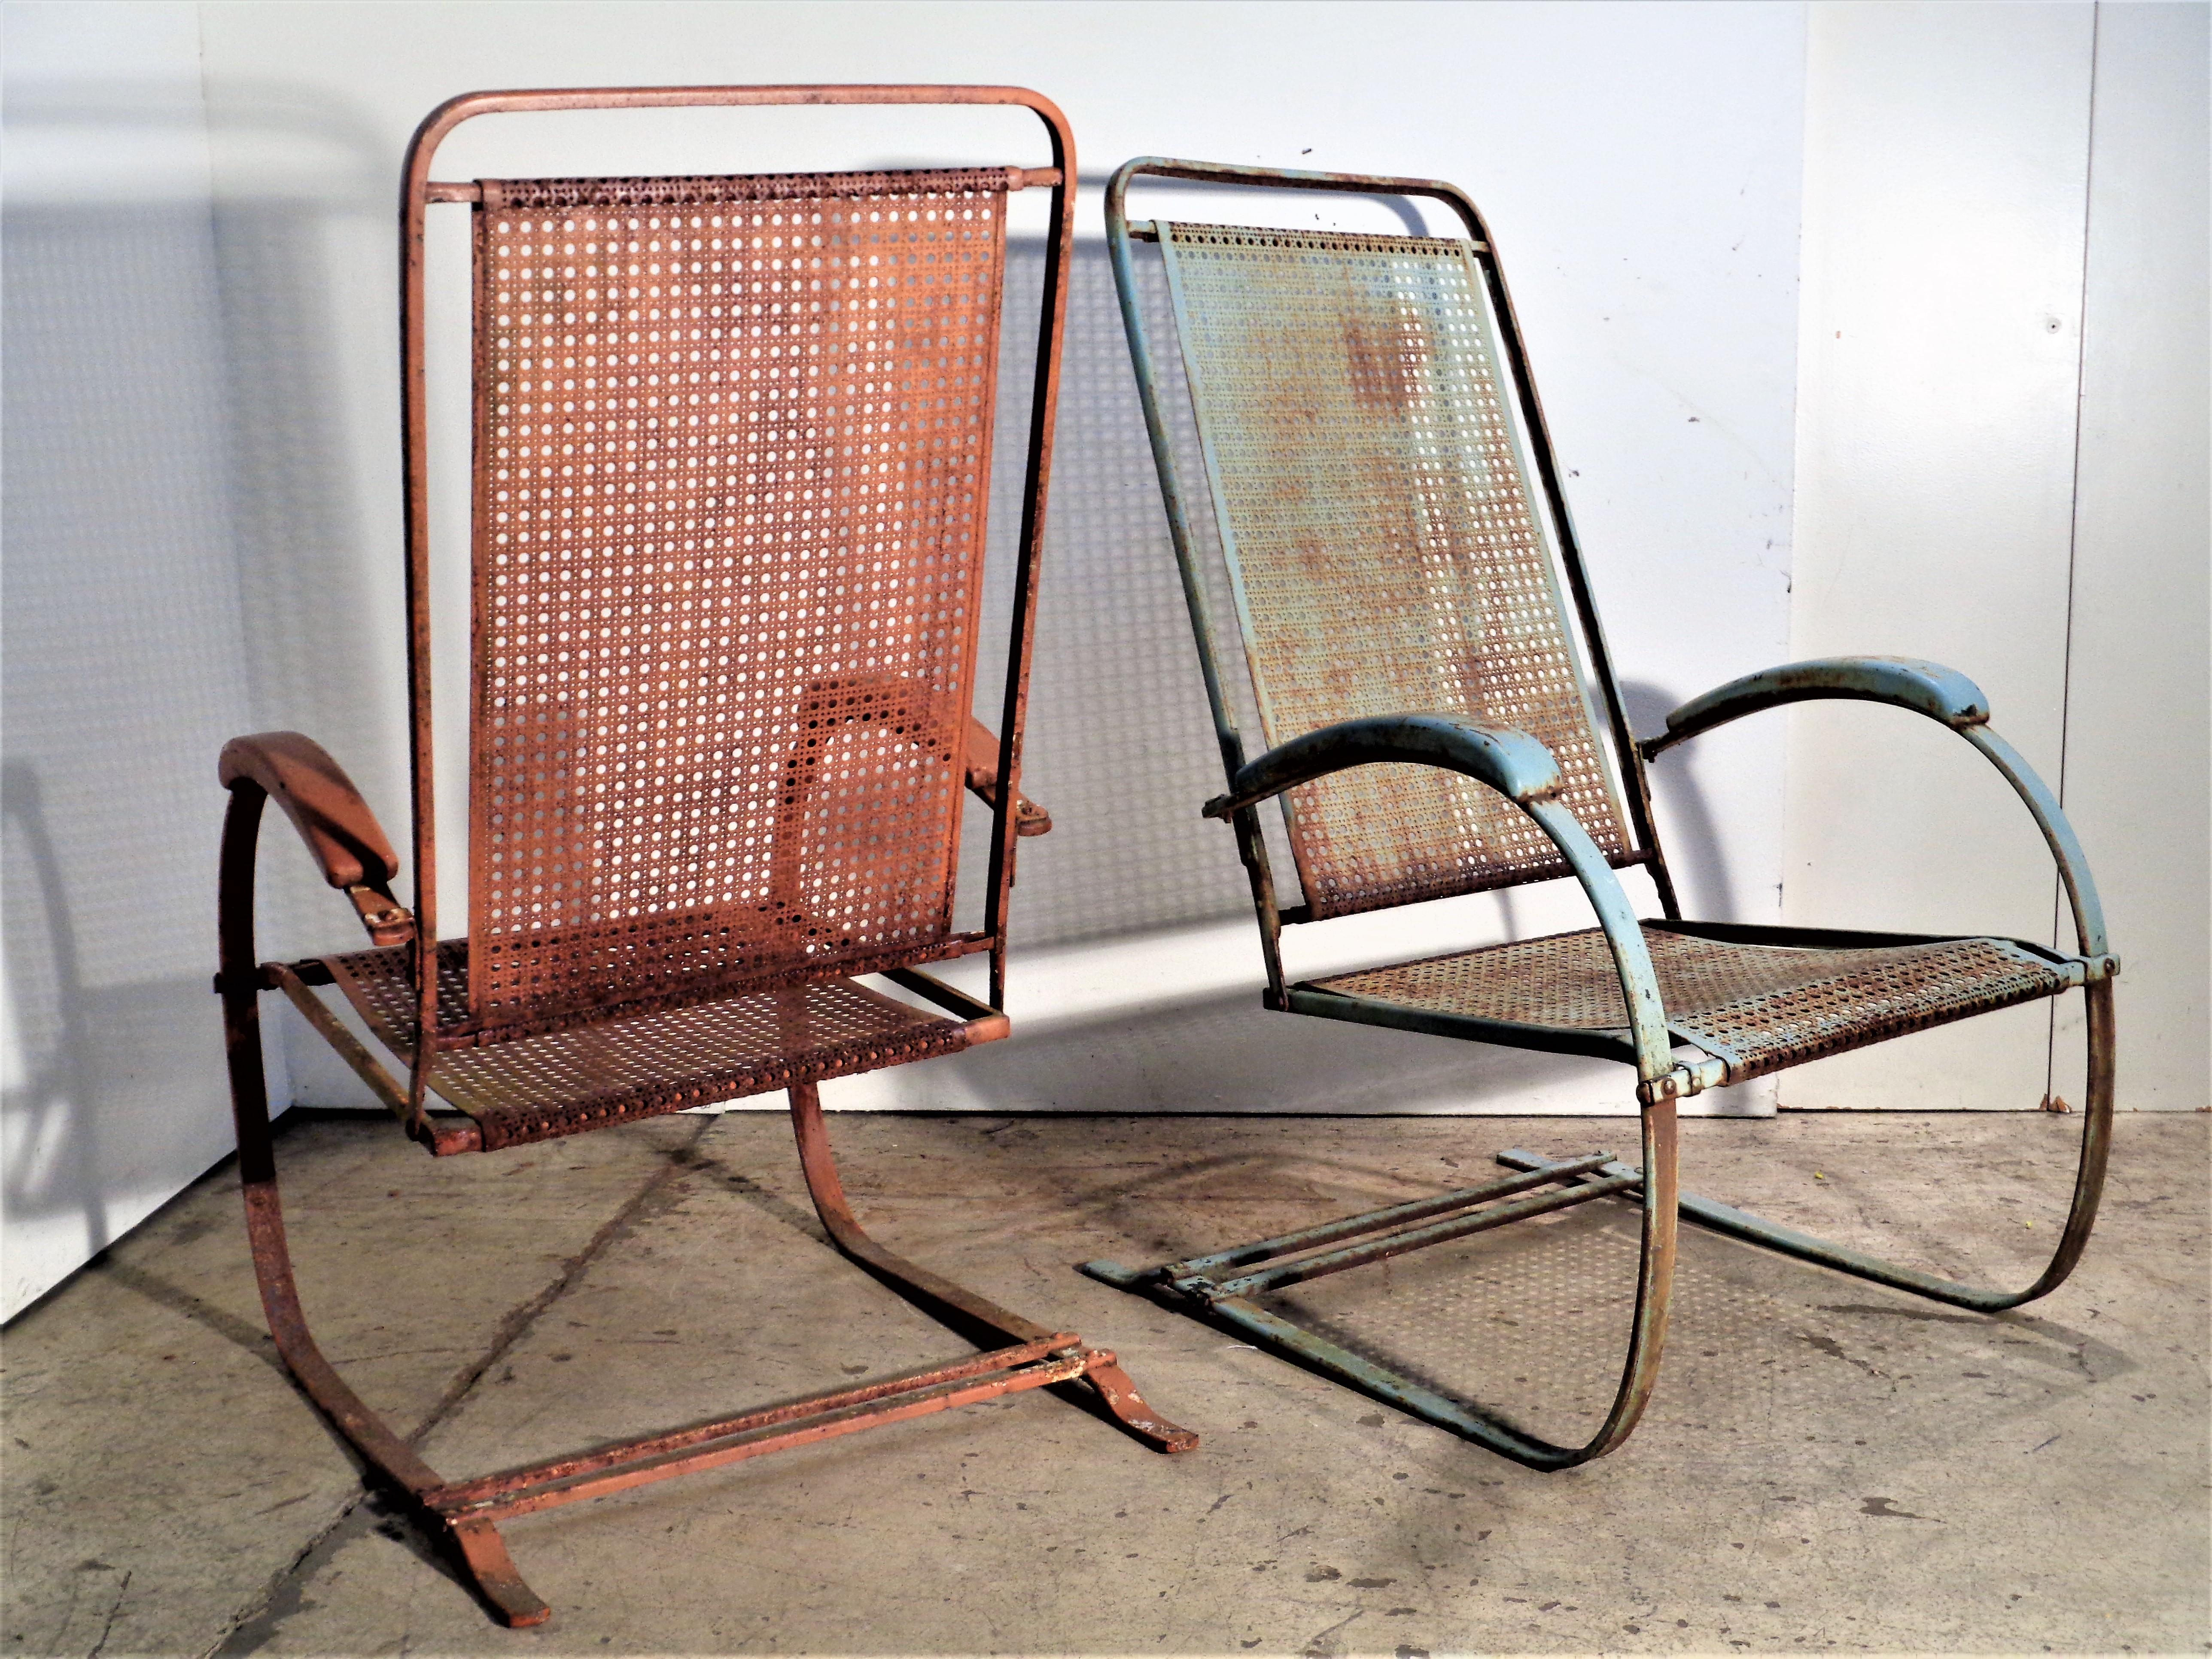 Metalwork   Classic Metal Mesh Spring Steel Cantilever Bounce Chairs - Howell Co. 1930's